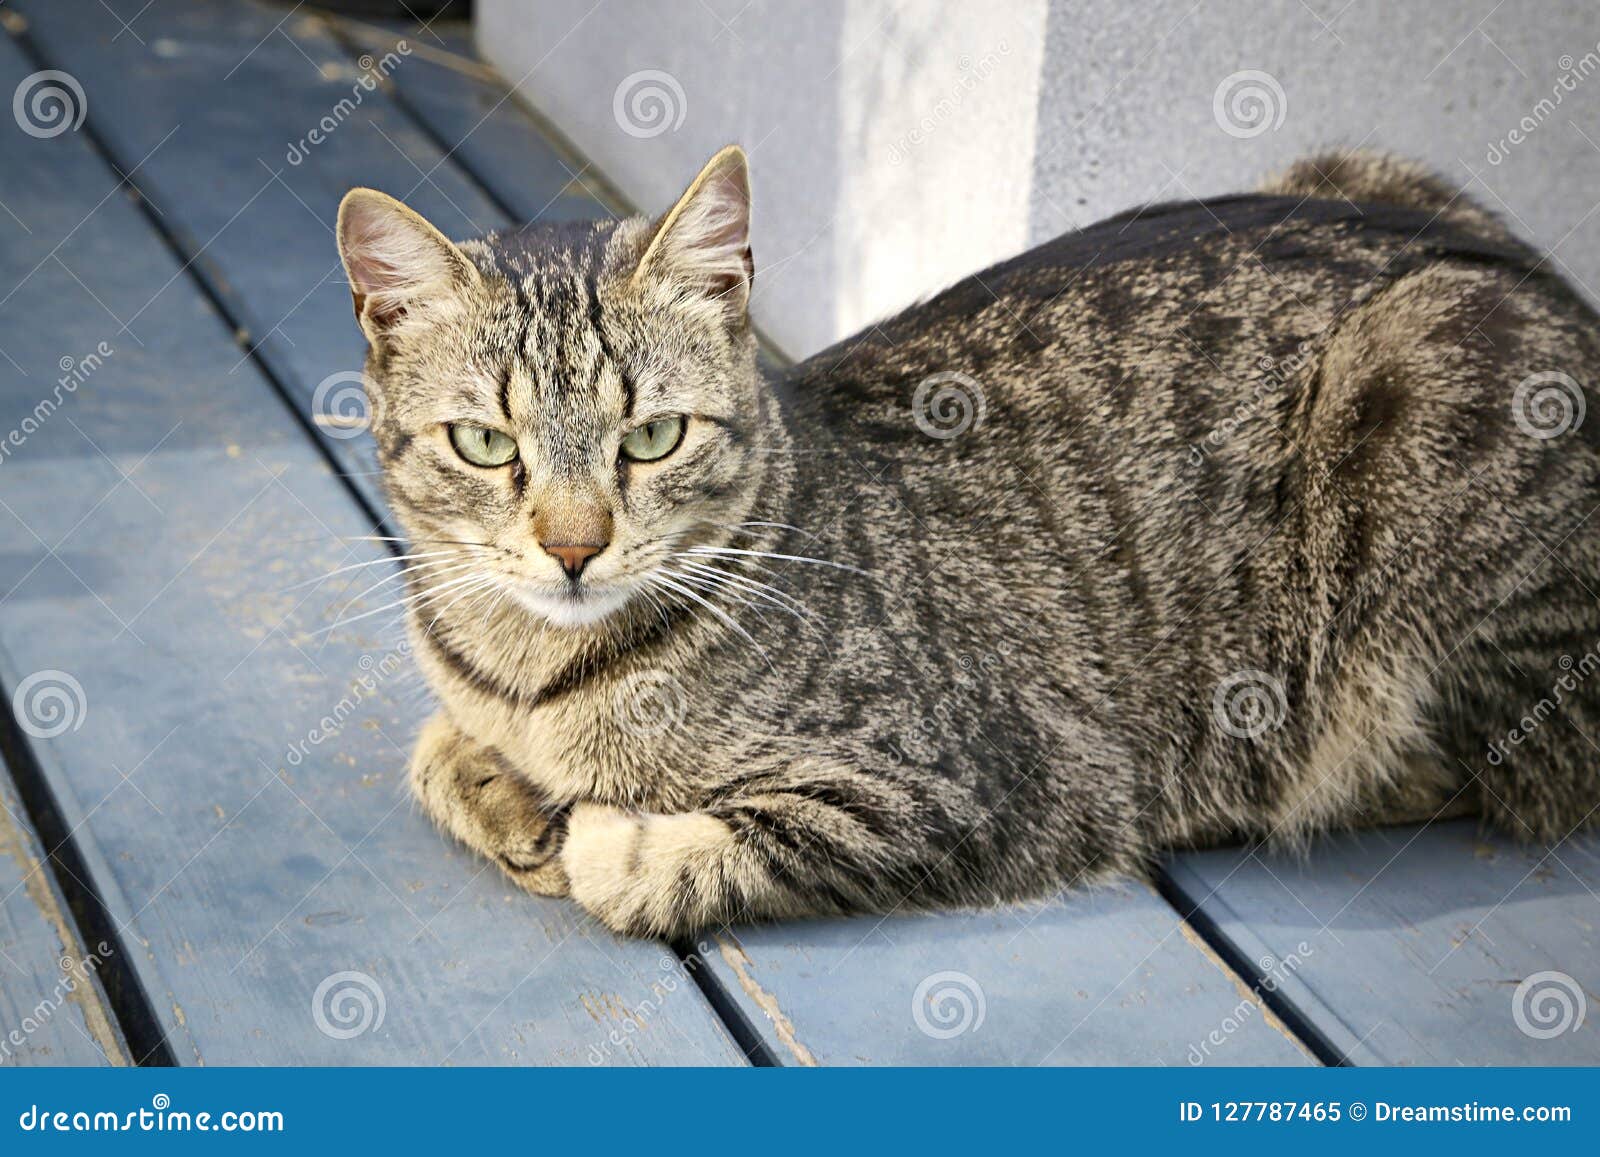 Tiger Cat Kitty Lying Looking Sweet Stock Image - Image of stripes